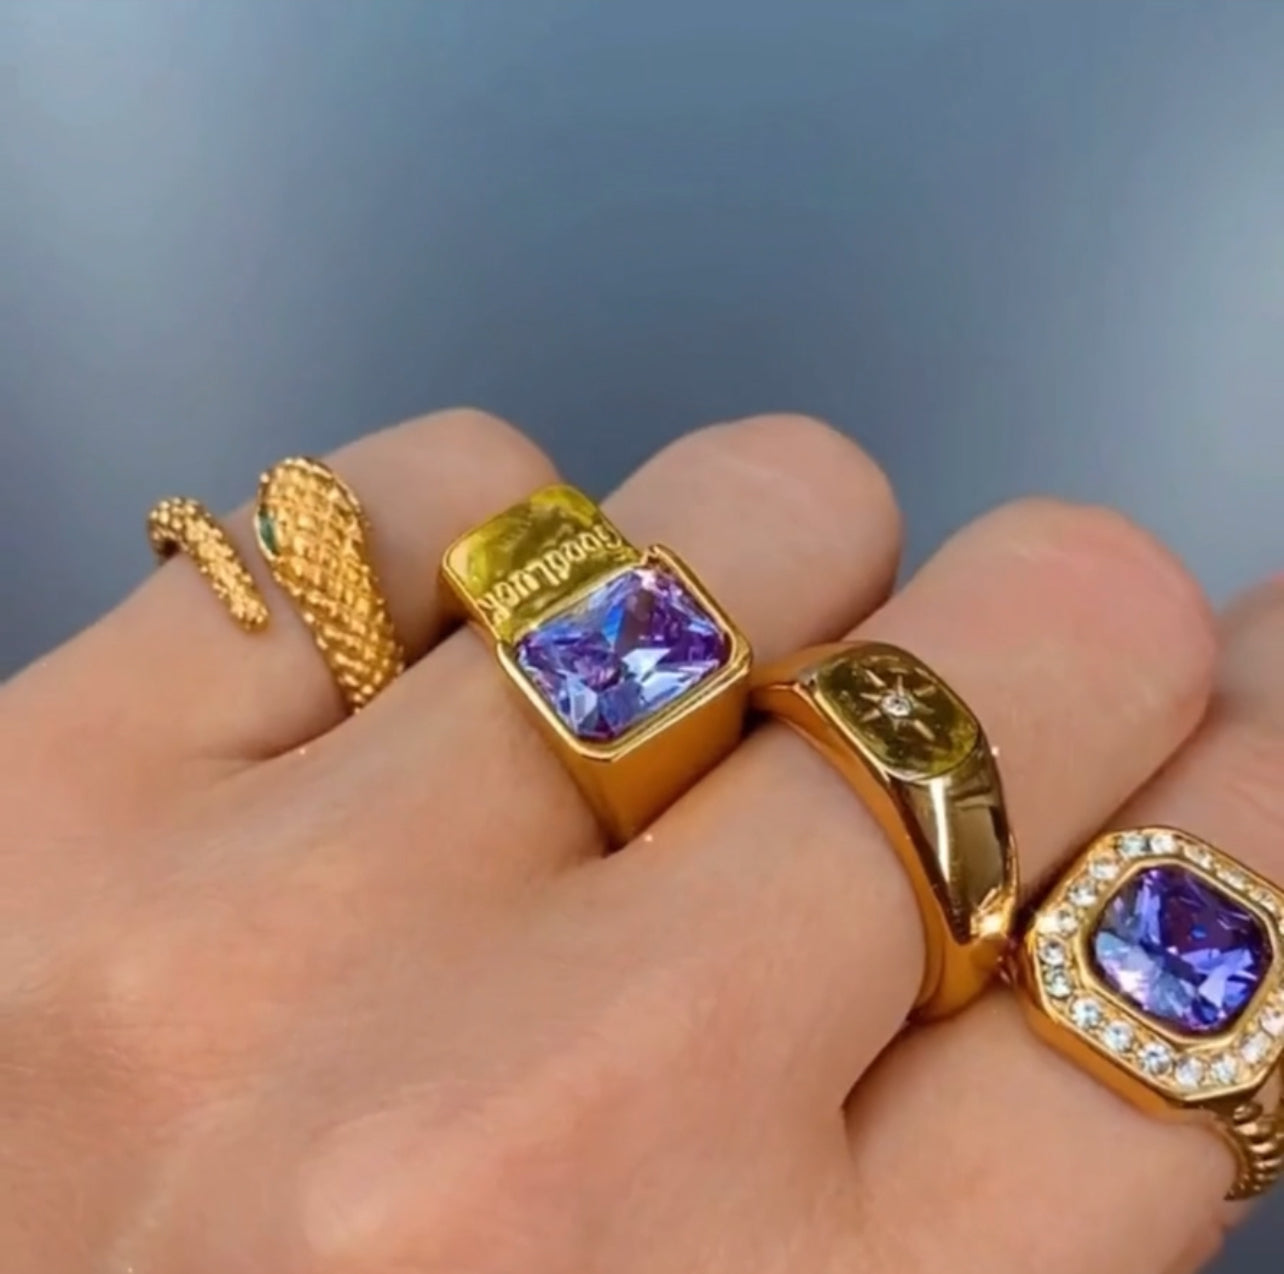 Load video: This video shoes some of our collection of rings